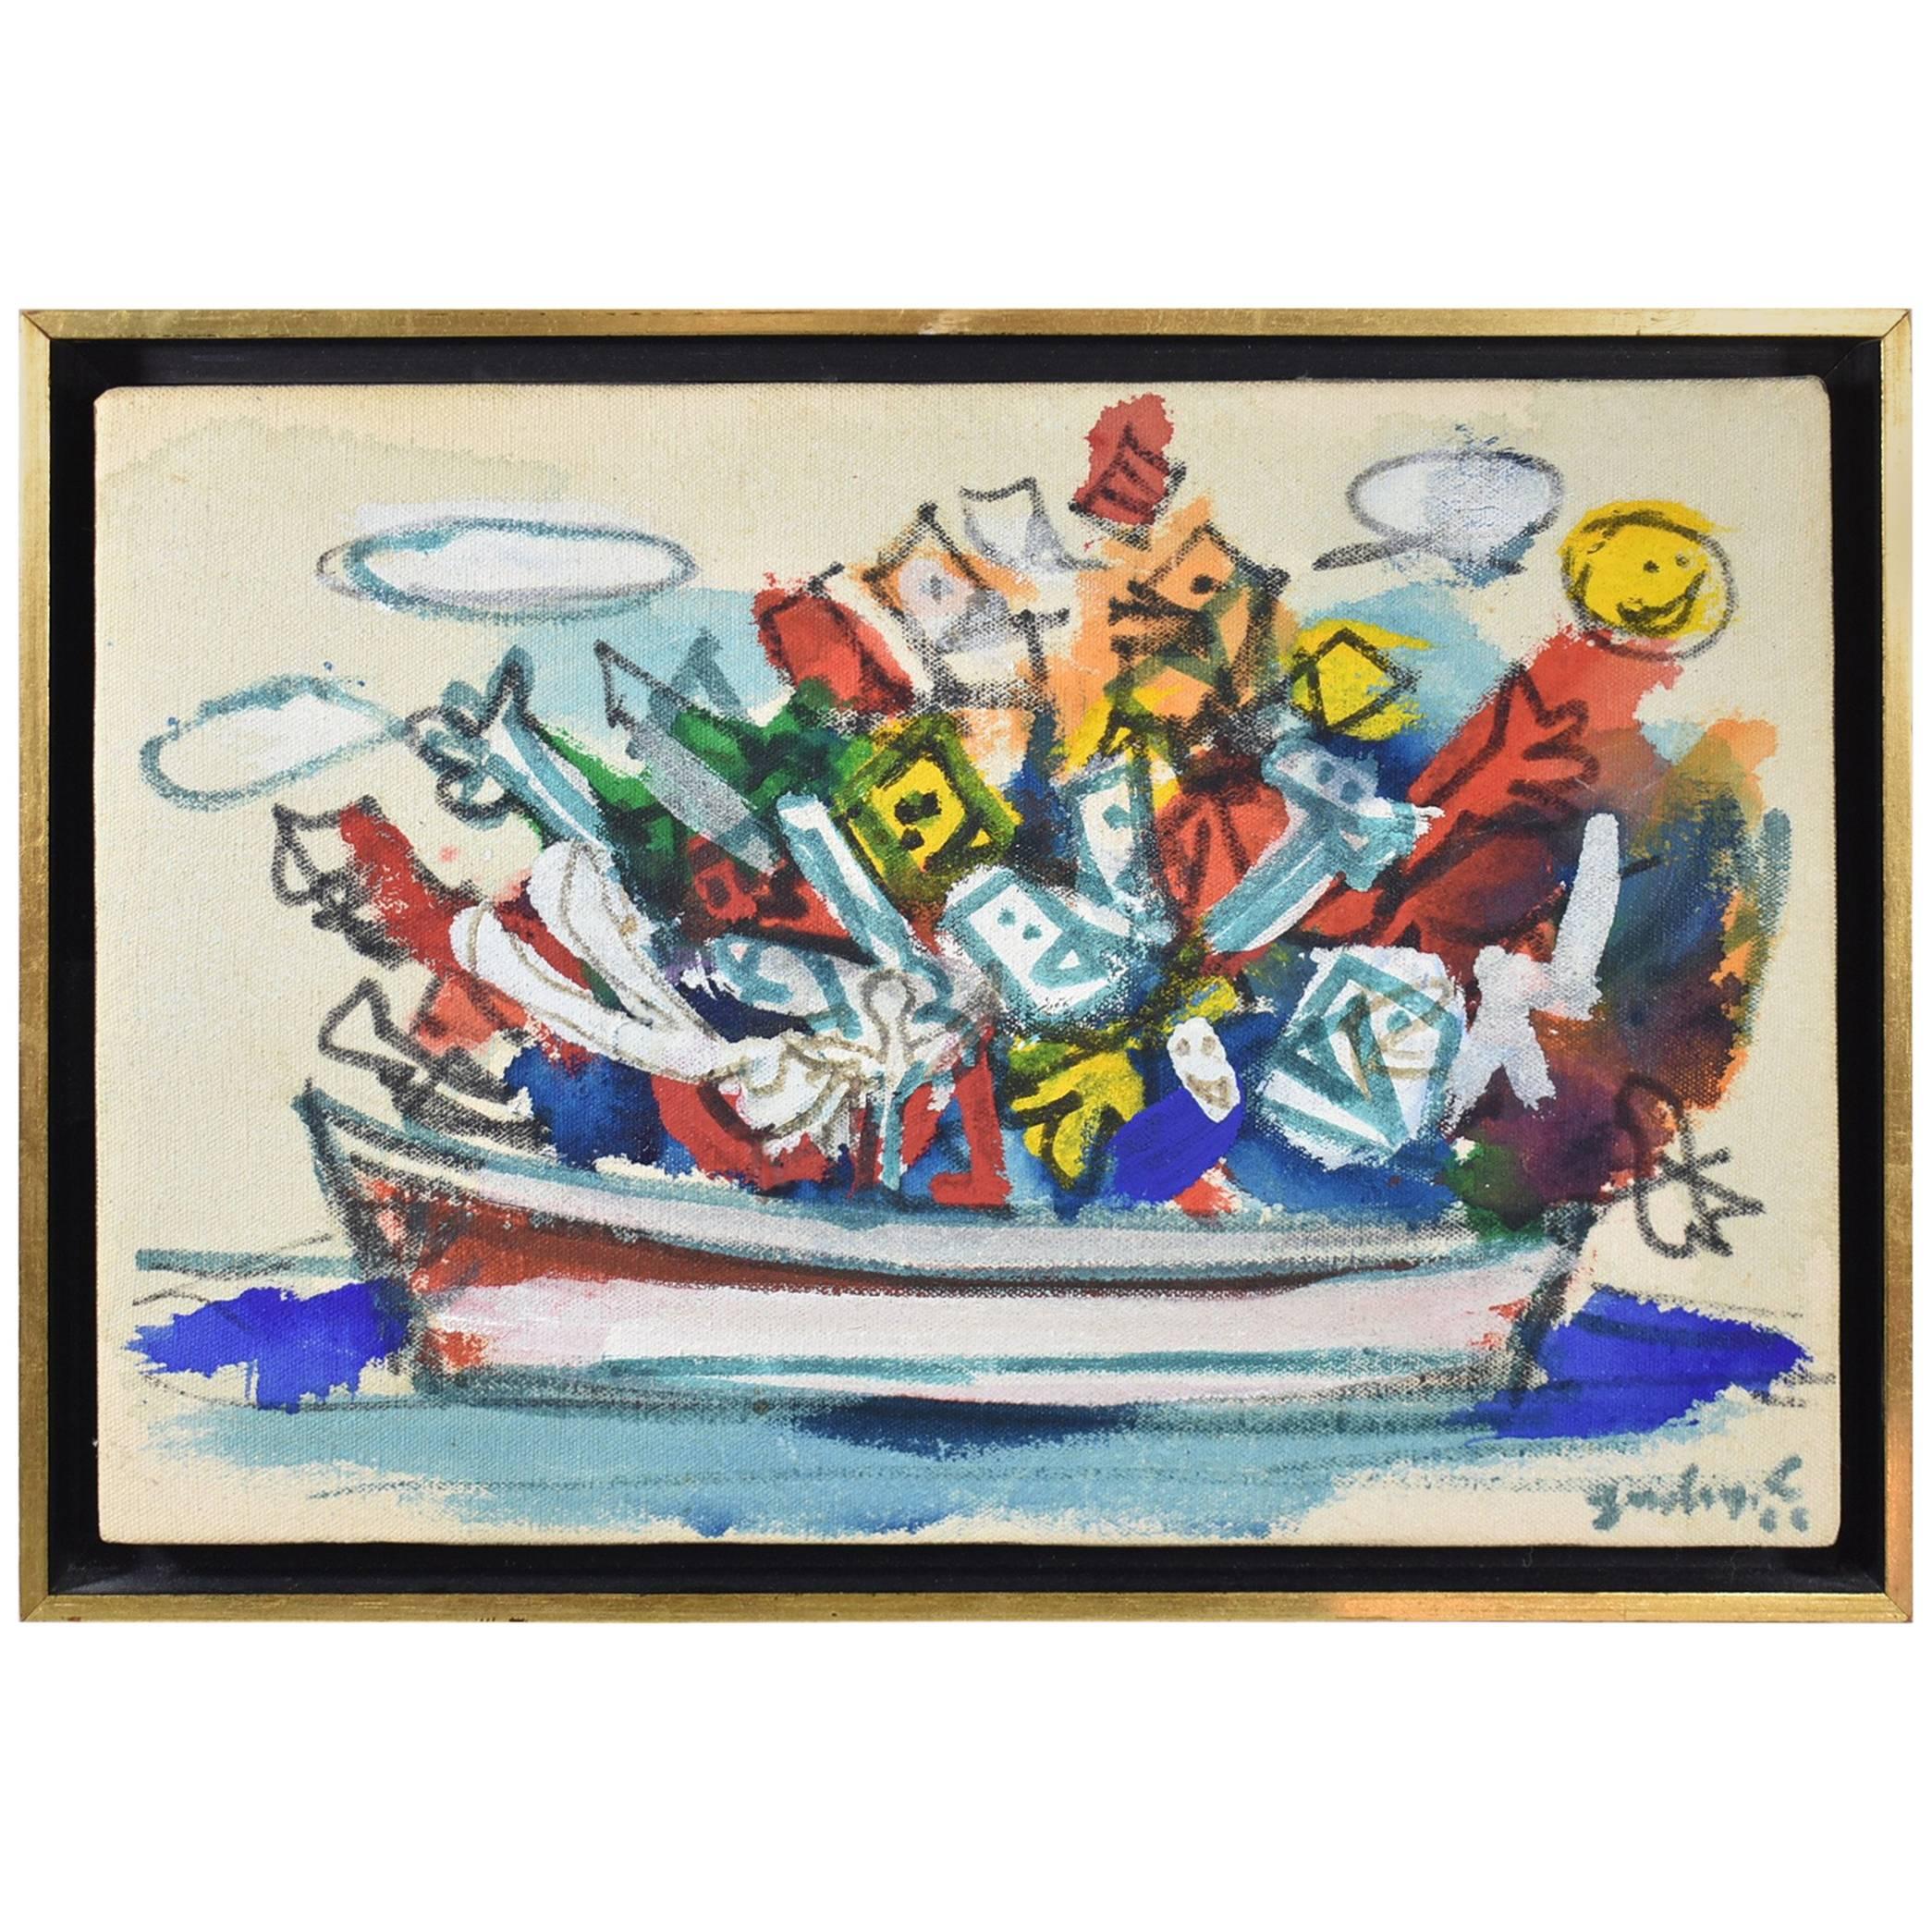 Oil on Canvas, "Happy Boat Trip L.N." by Robert Goodnough, 1966